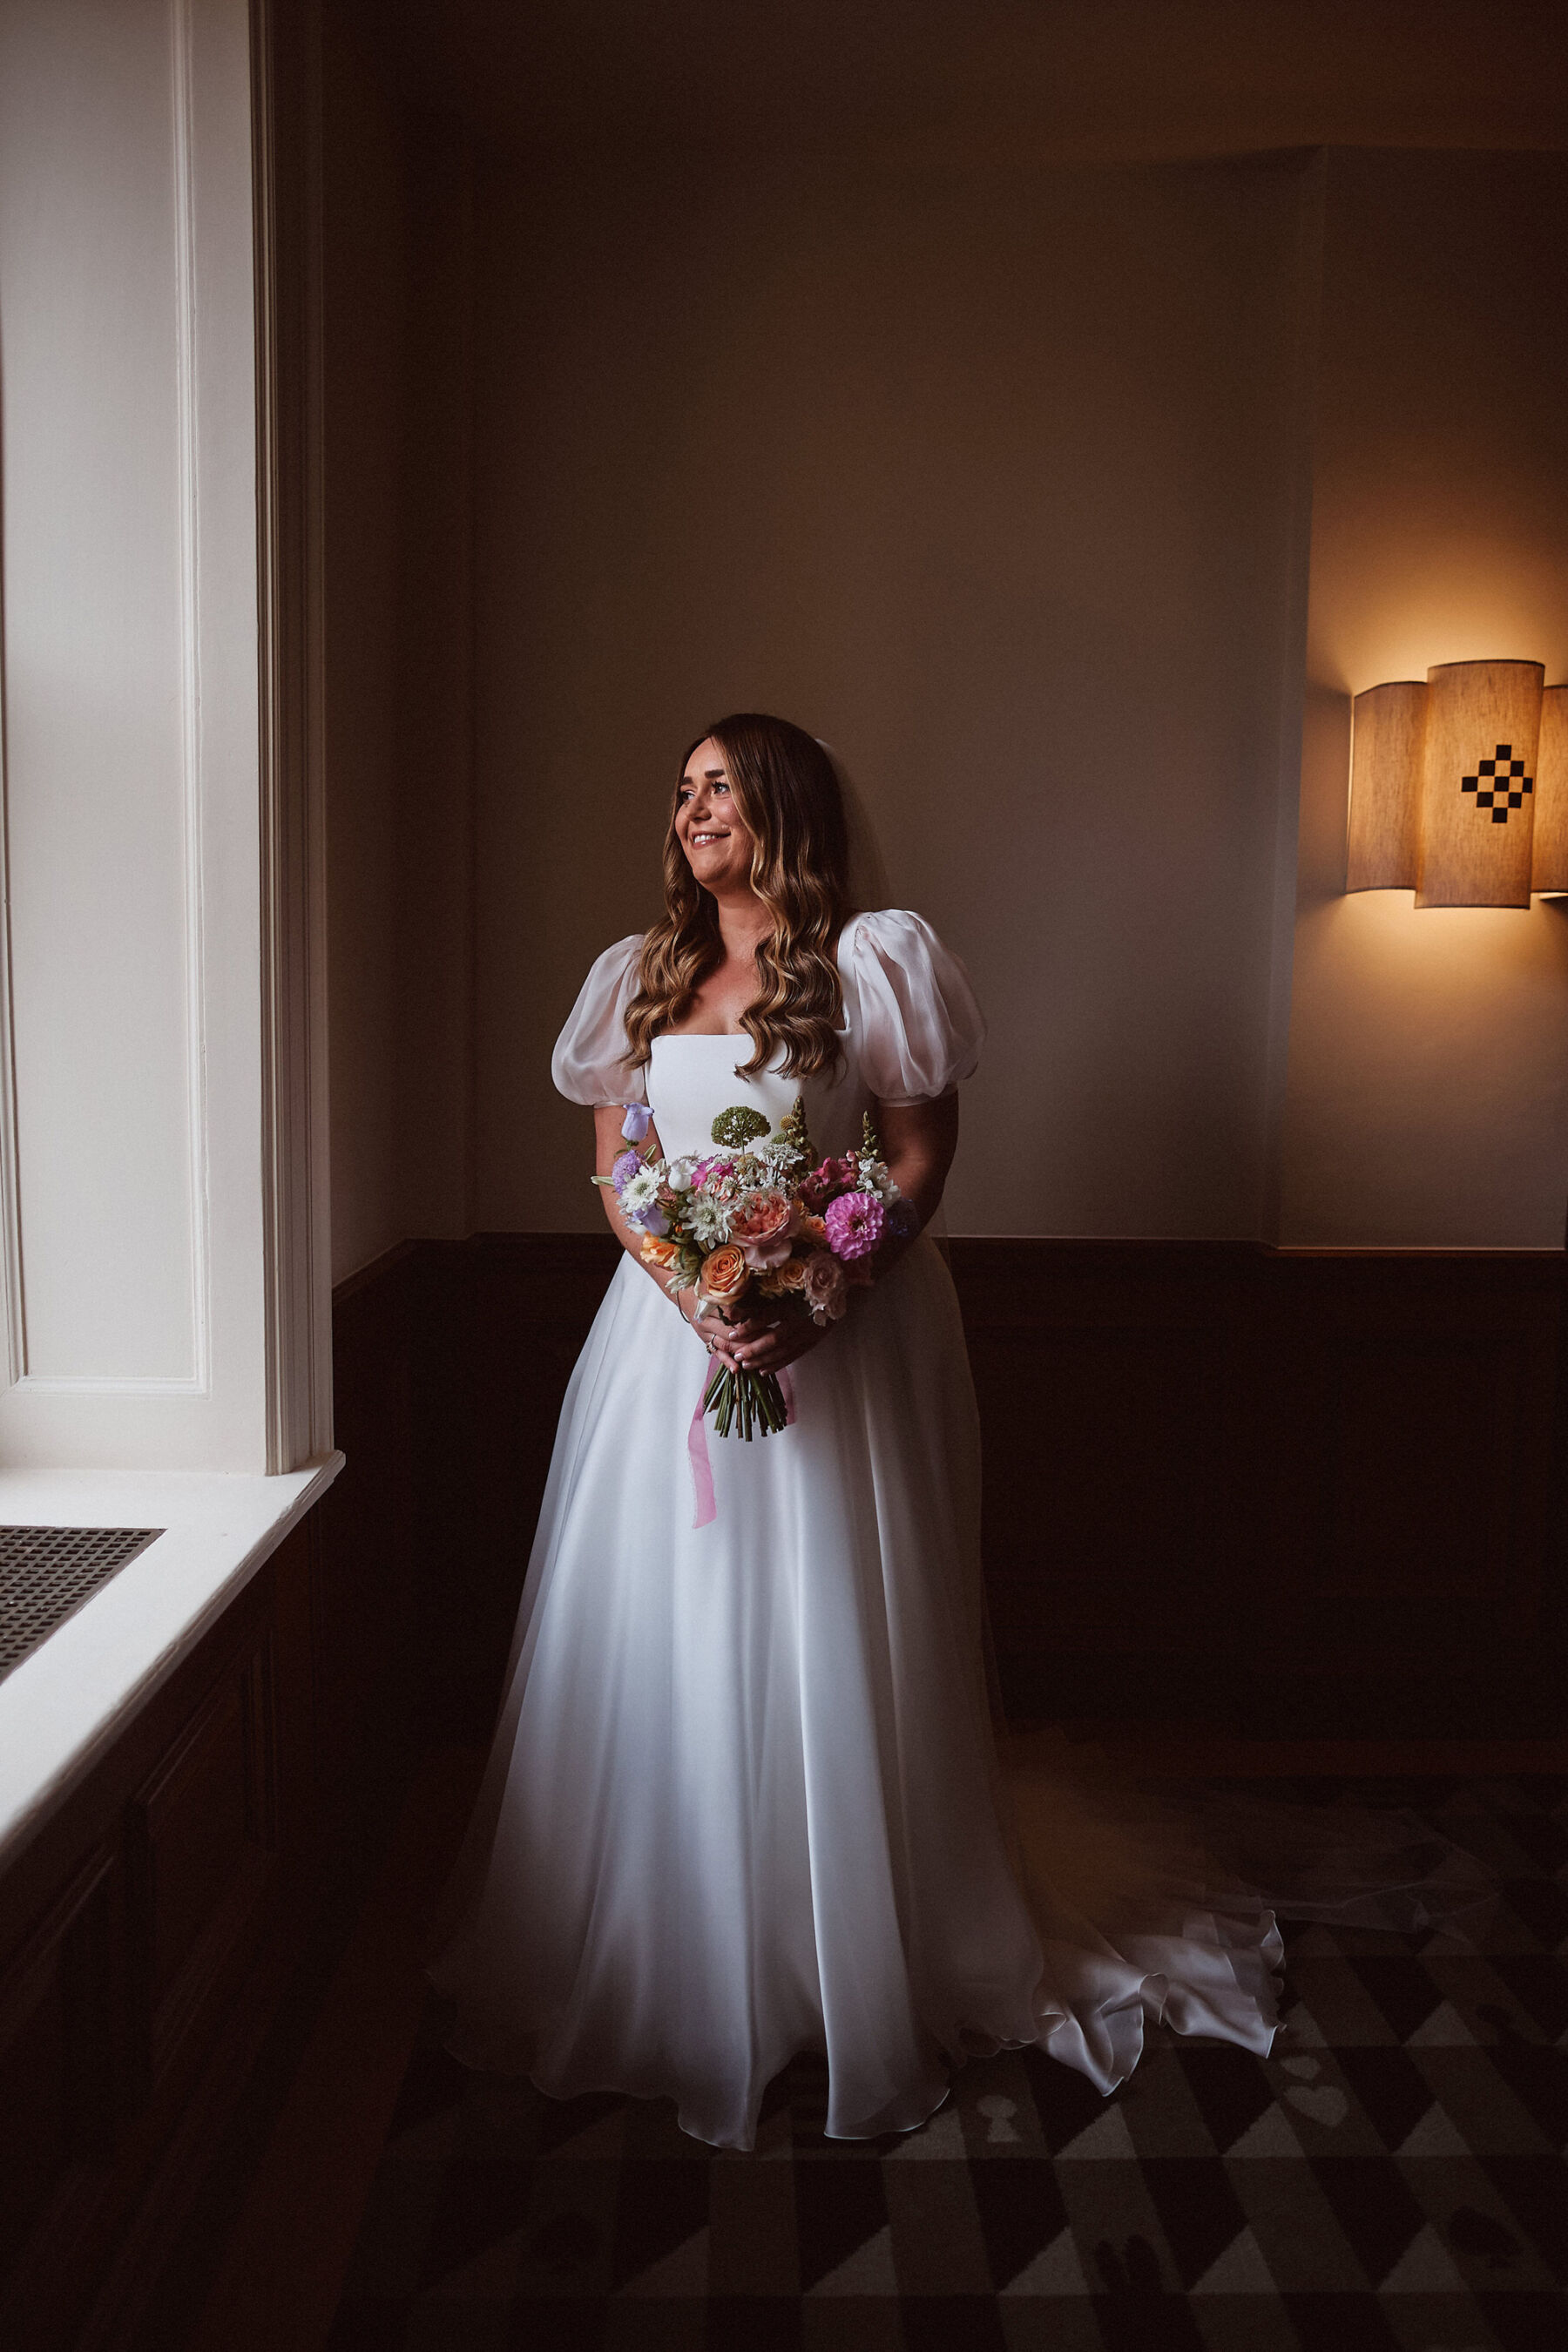 Bride in a puff sleeve Suzanne Neville wedding dress, standing by a window and bathed in window light, and carrying a colourful wedding bouquet.